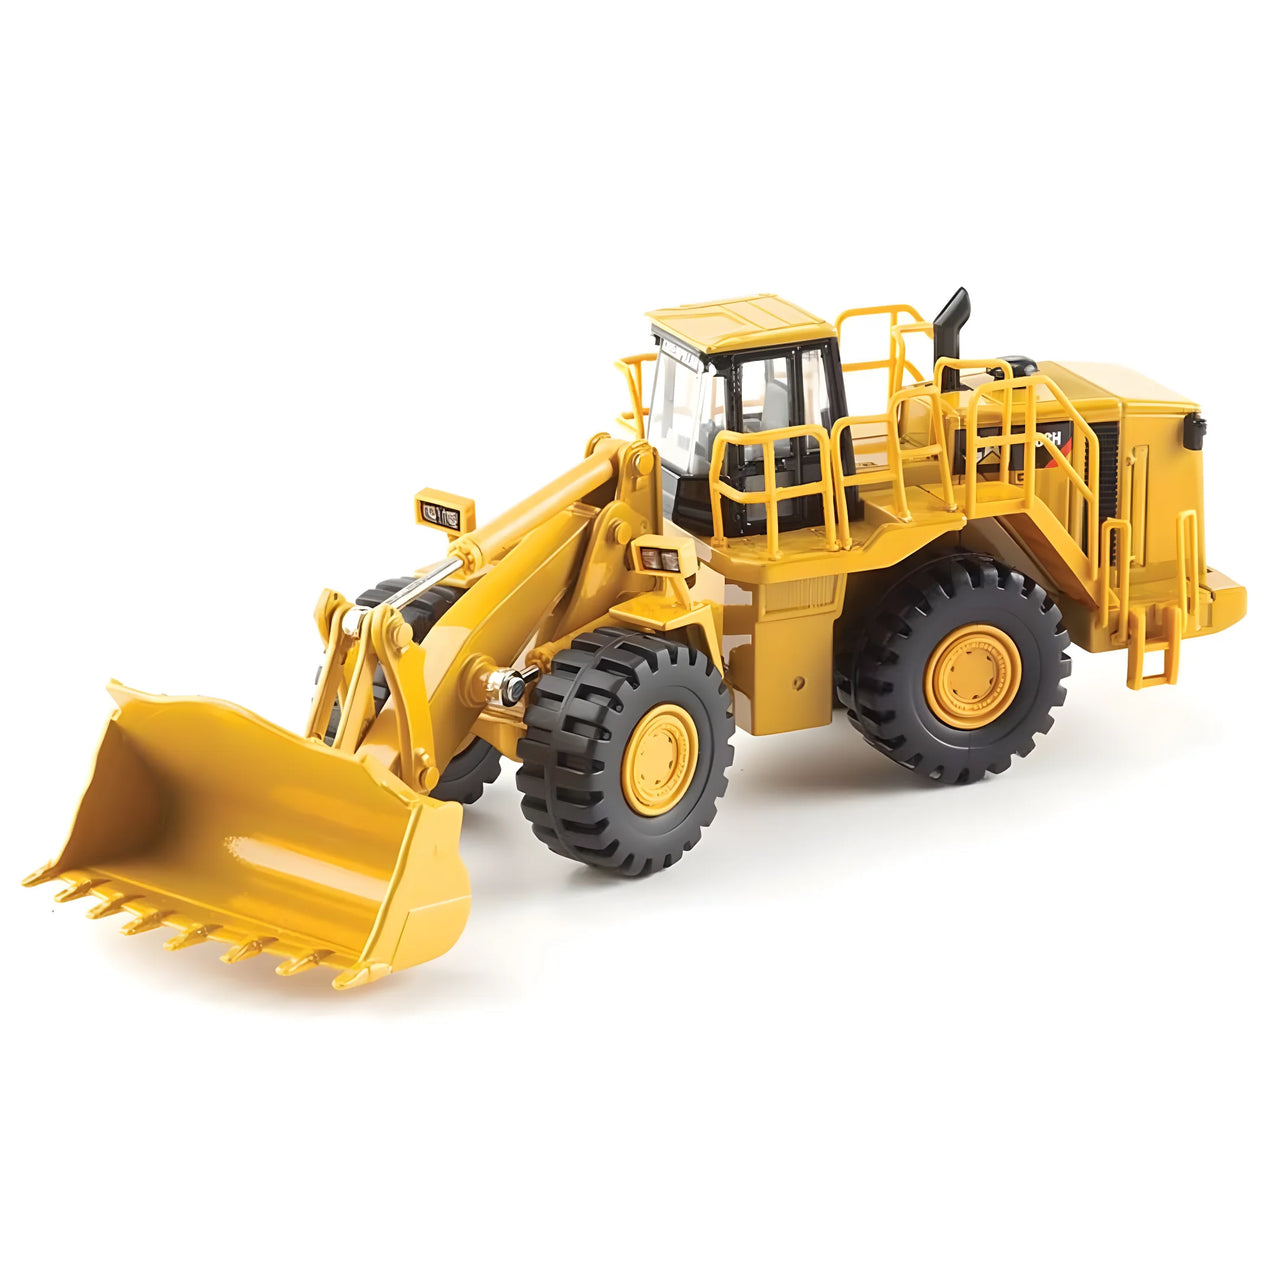 55222 Caterpillar 988H Wheel Loader 1:64 Scale (Discontinued Model)